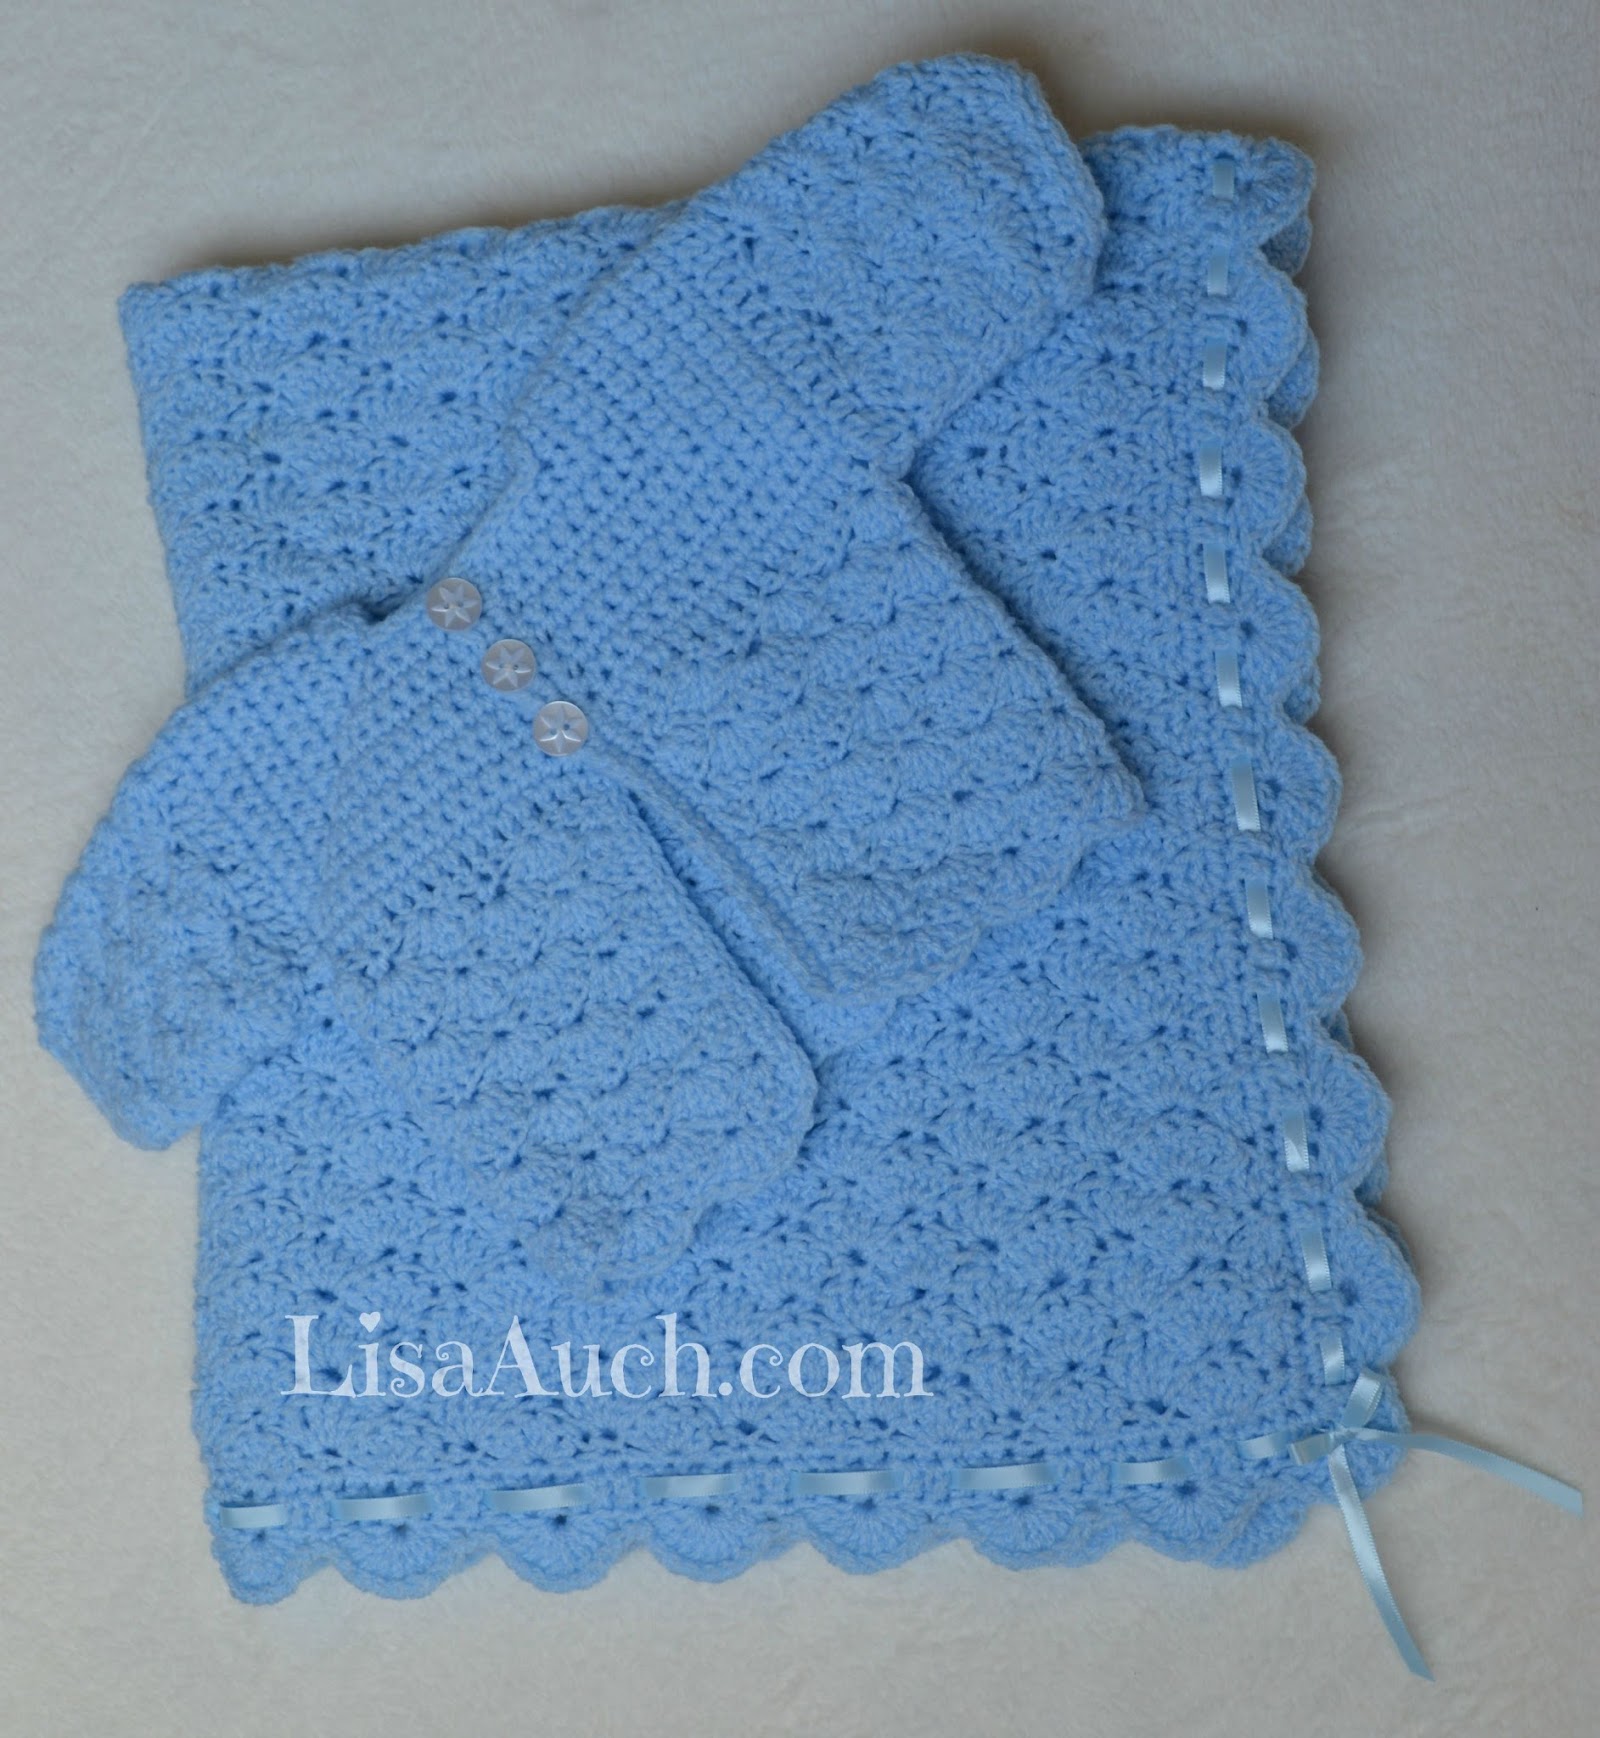 Free Crochet Patterns for Babies Cardigan and Blanket Set (The Perfect Crochet Set for a Boy or Girl) 